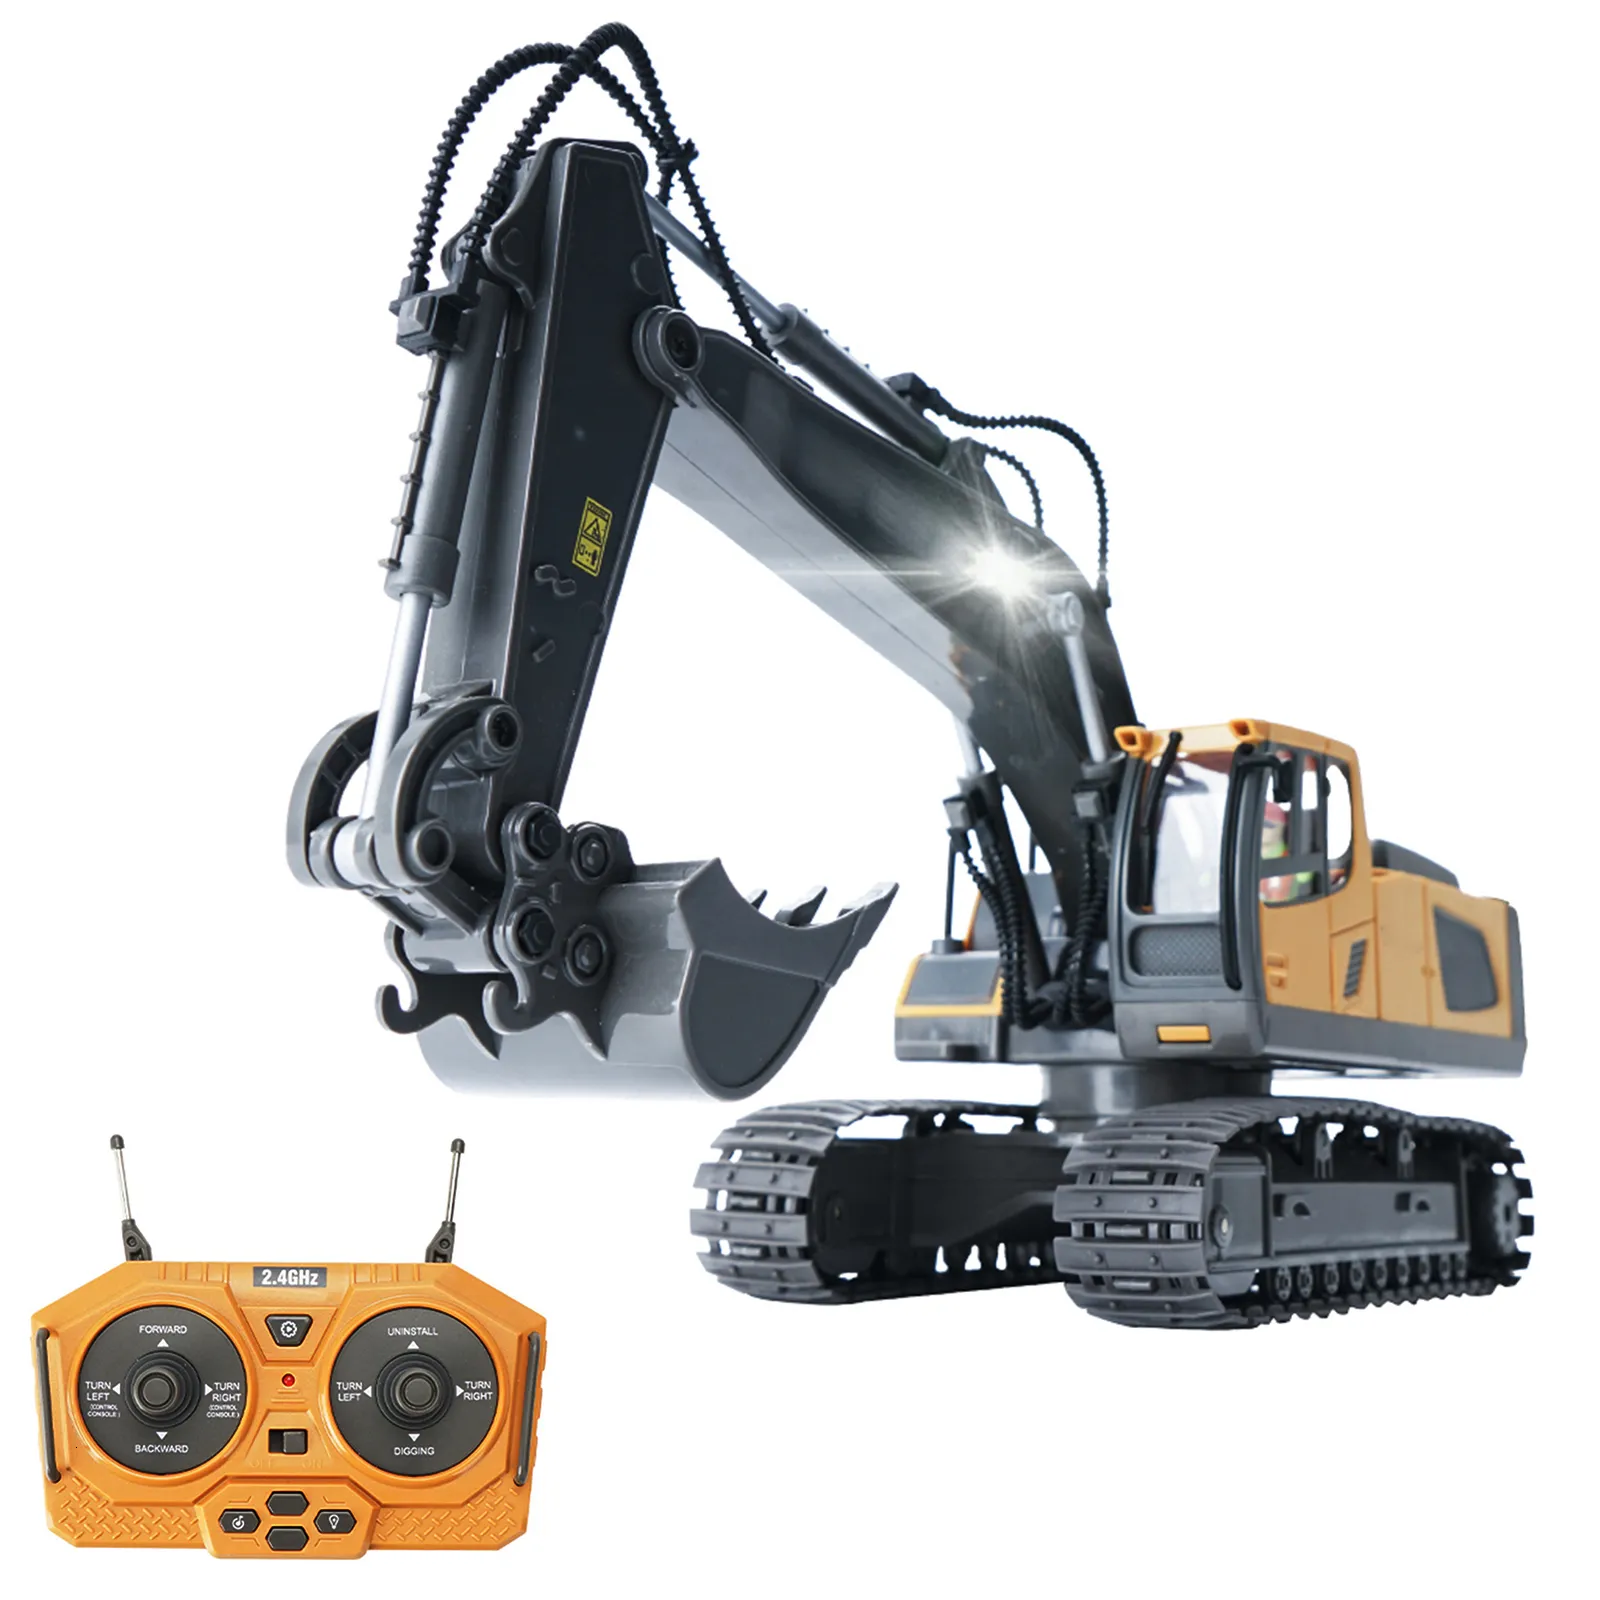 ElectricRC Car RC ExcavatorBulldozer 120 24 GHz 11ch Construction Truck Engineering Vehicles Education Toys for Kids With Light Music 230630